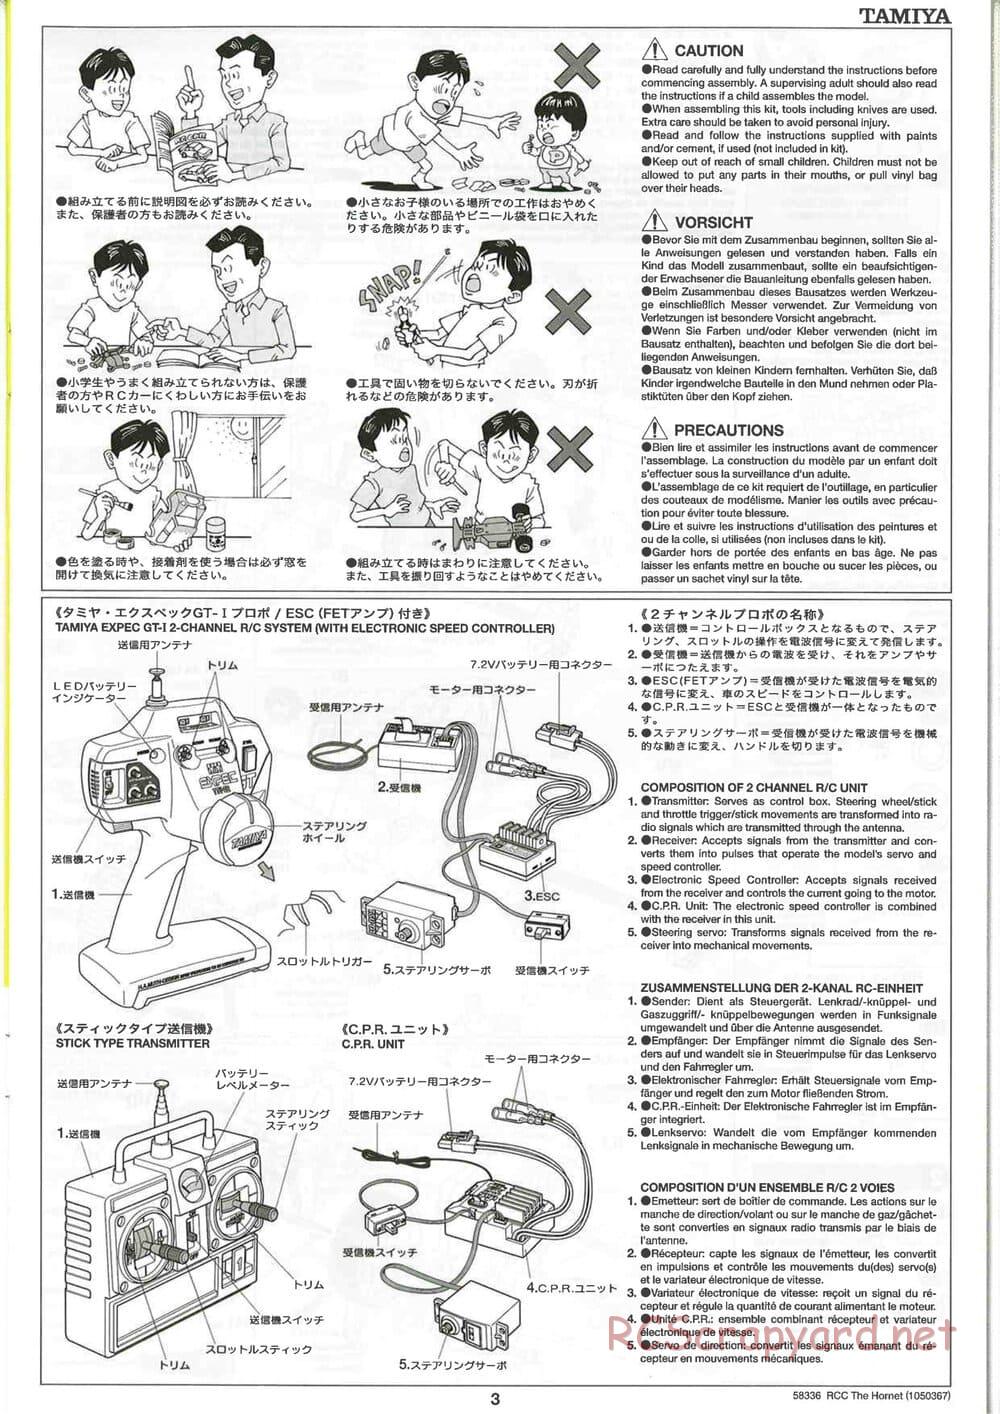 Tamiya - The Hornet (2004) - GH Chassis - Manual - Page 3